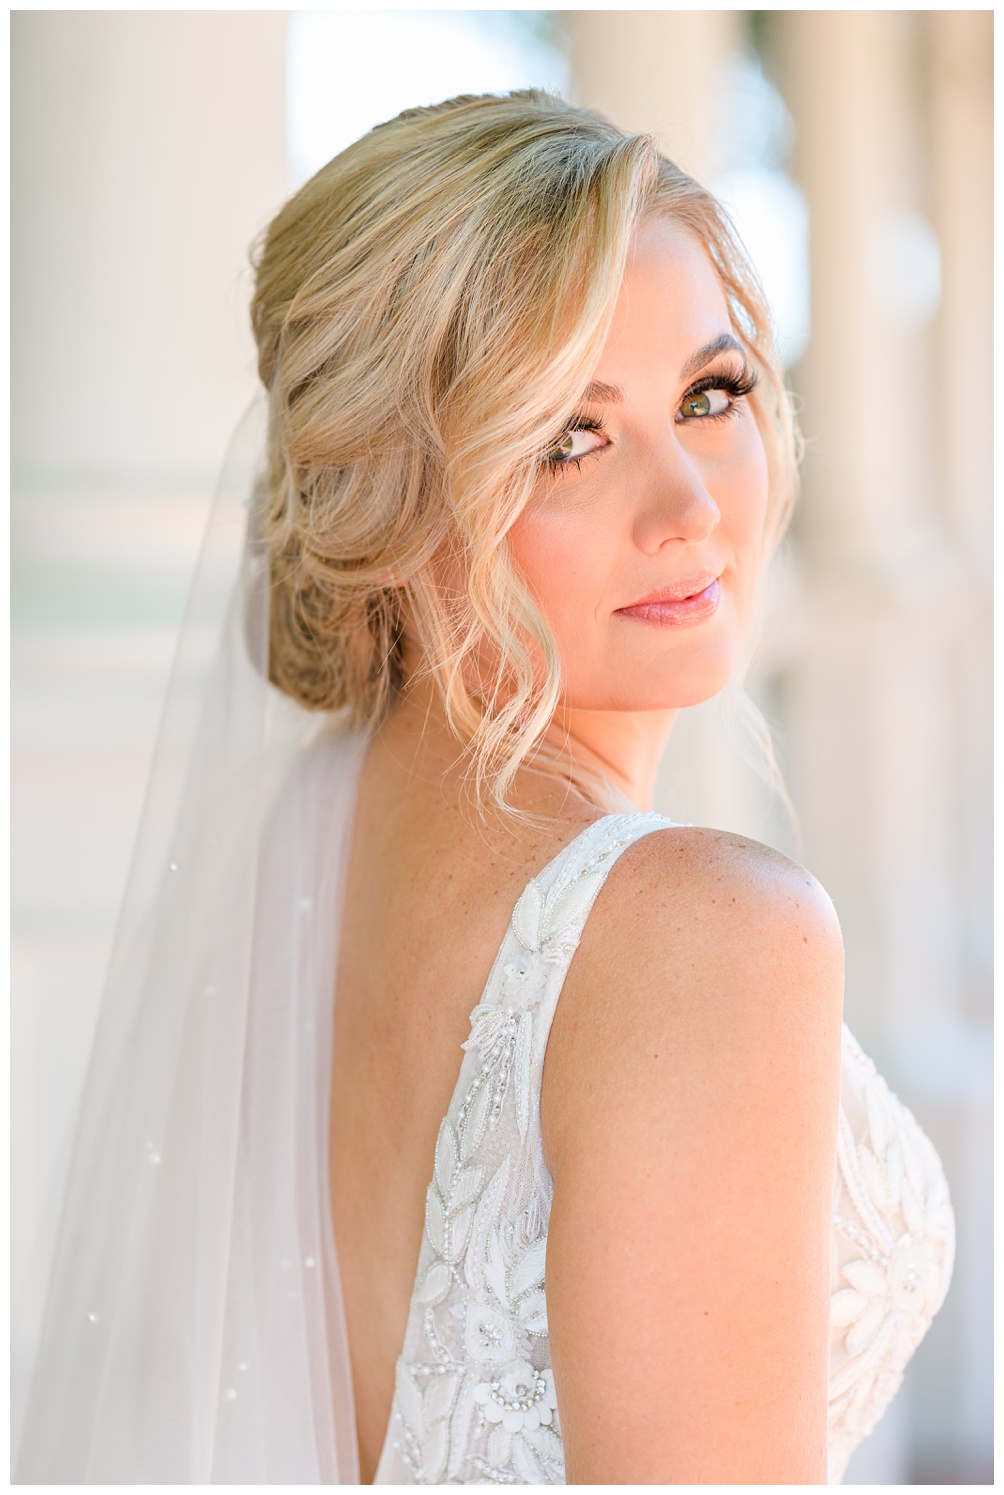 Bridal Portraits at Woodbine Mansion in Round Rock Texas